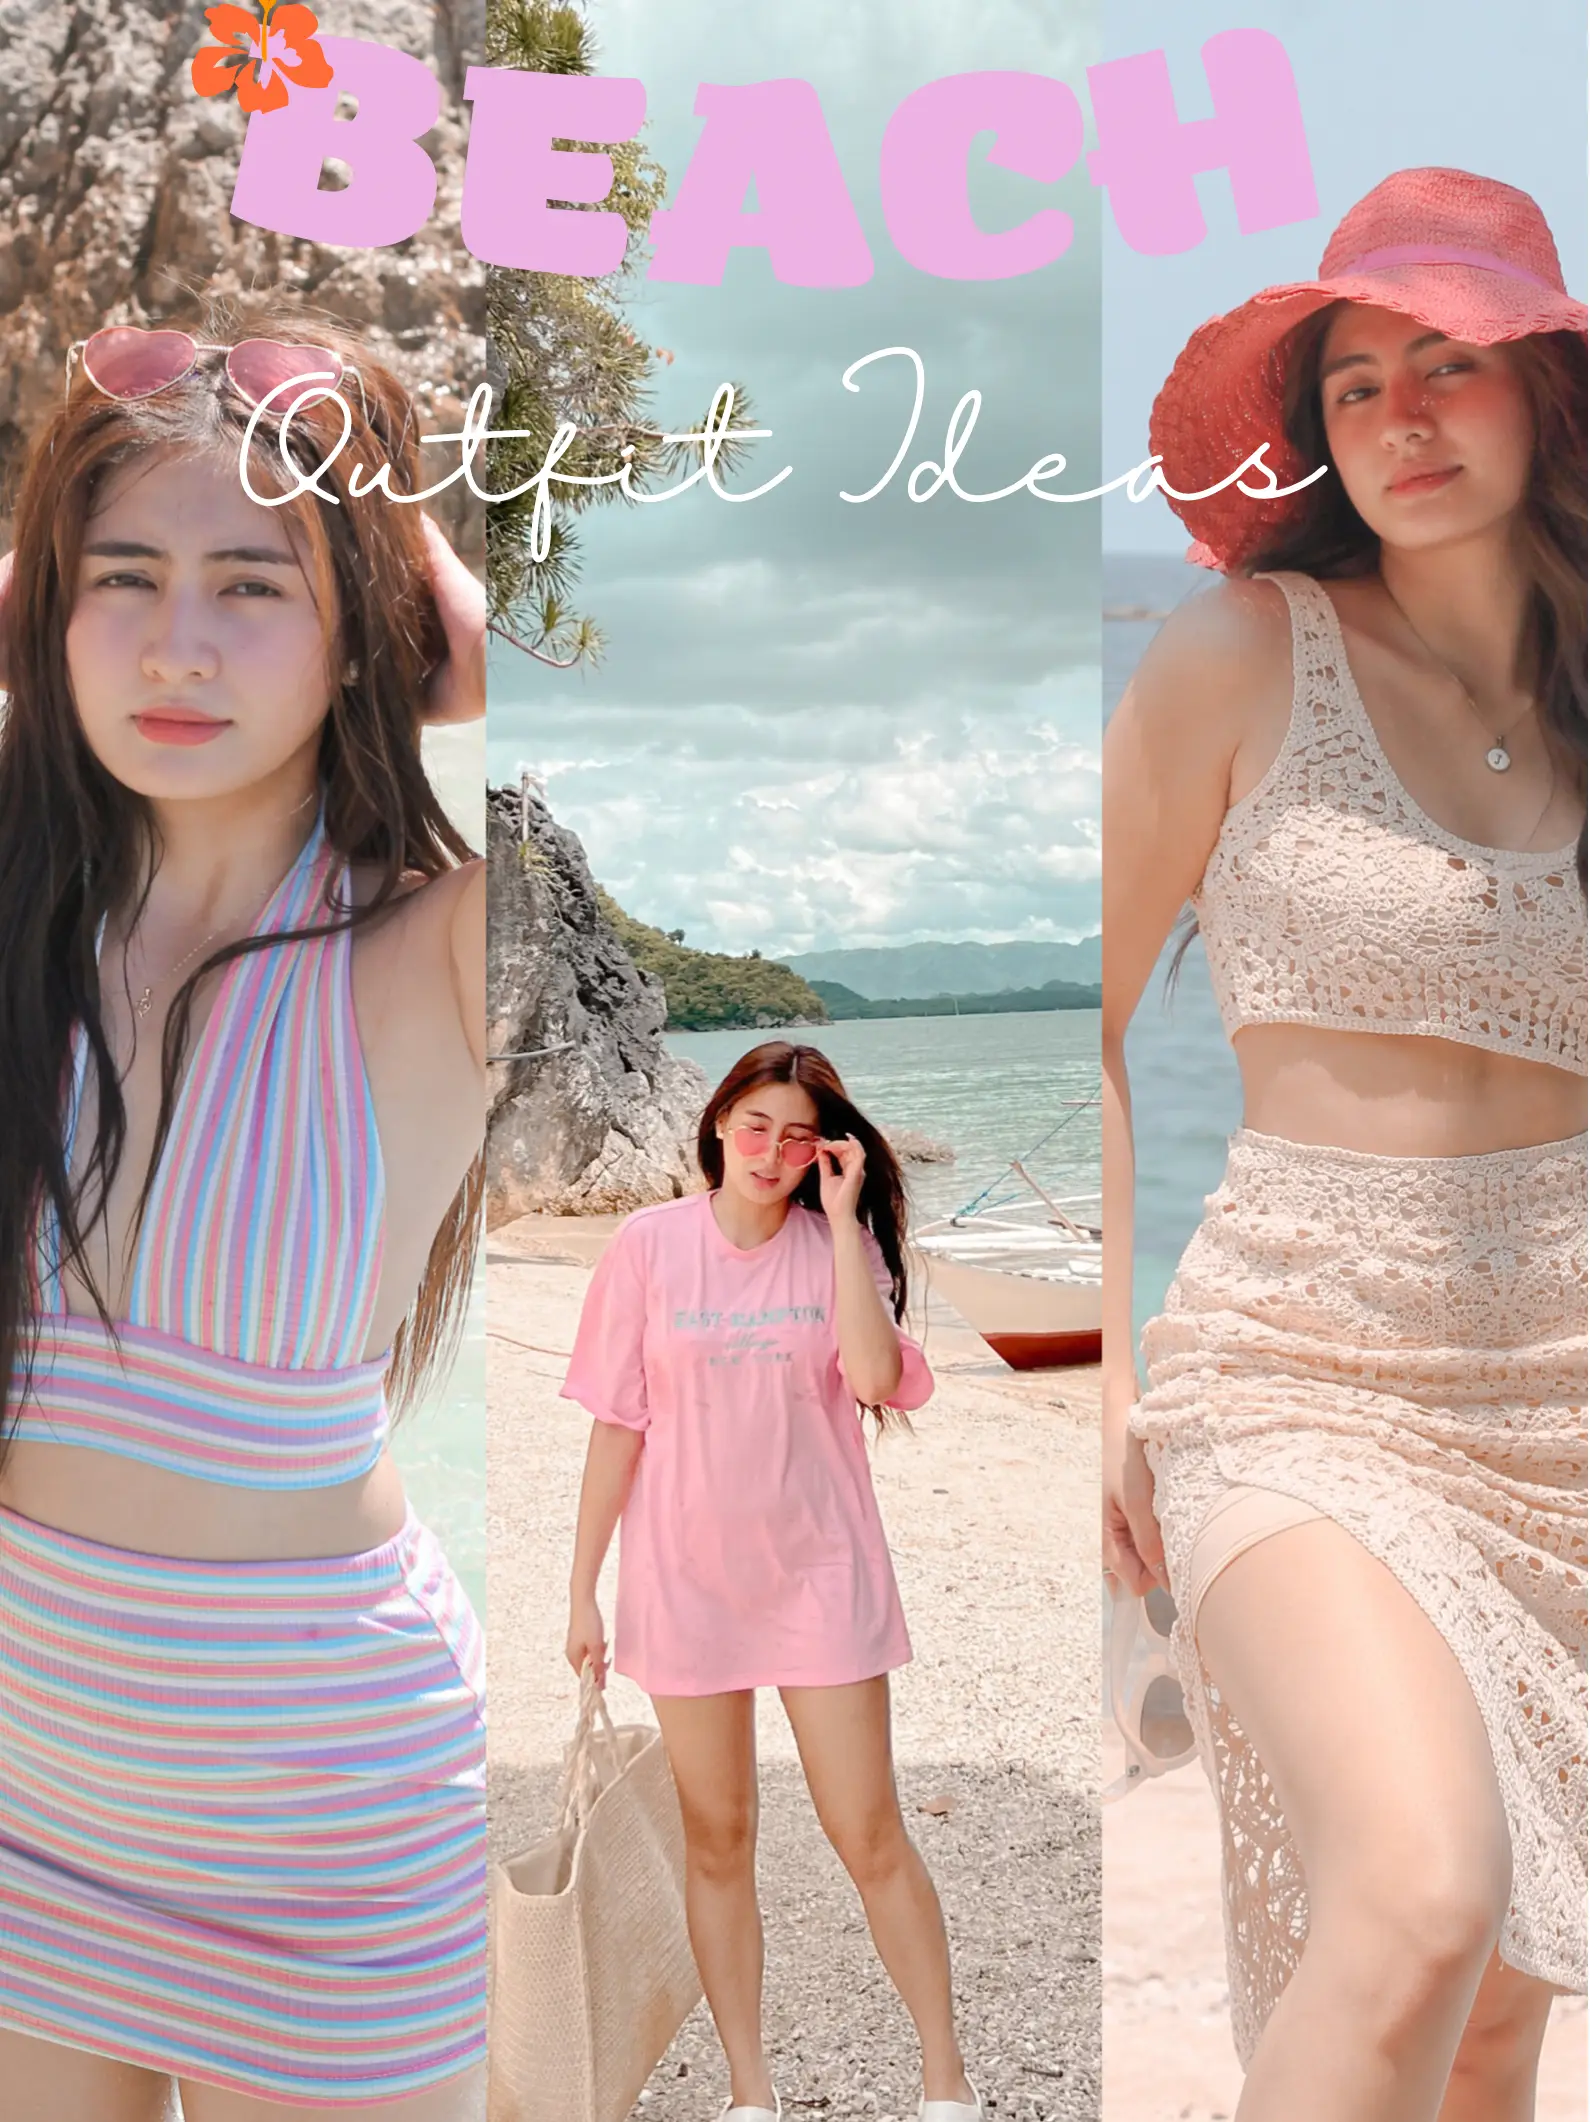 BEACH SUMMER OUTFIT 2 IN 1 TERNO PANTS SLIT FREE SIZE PLUS SIZE